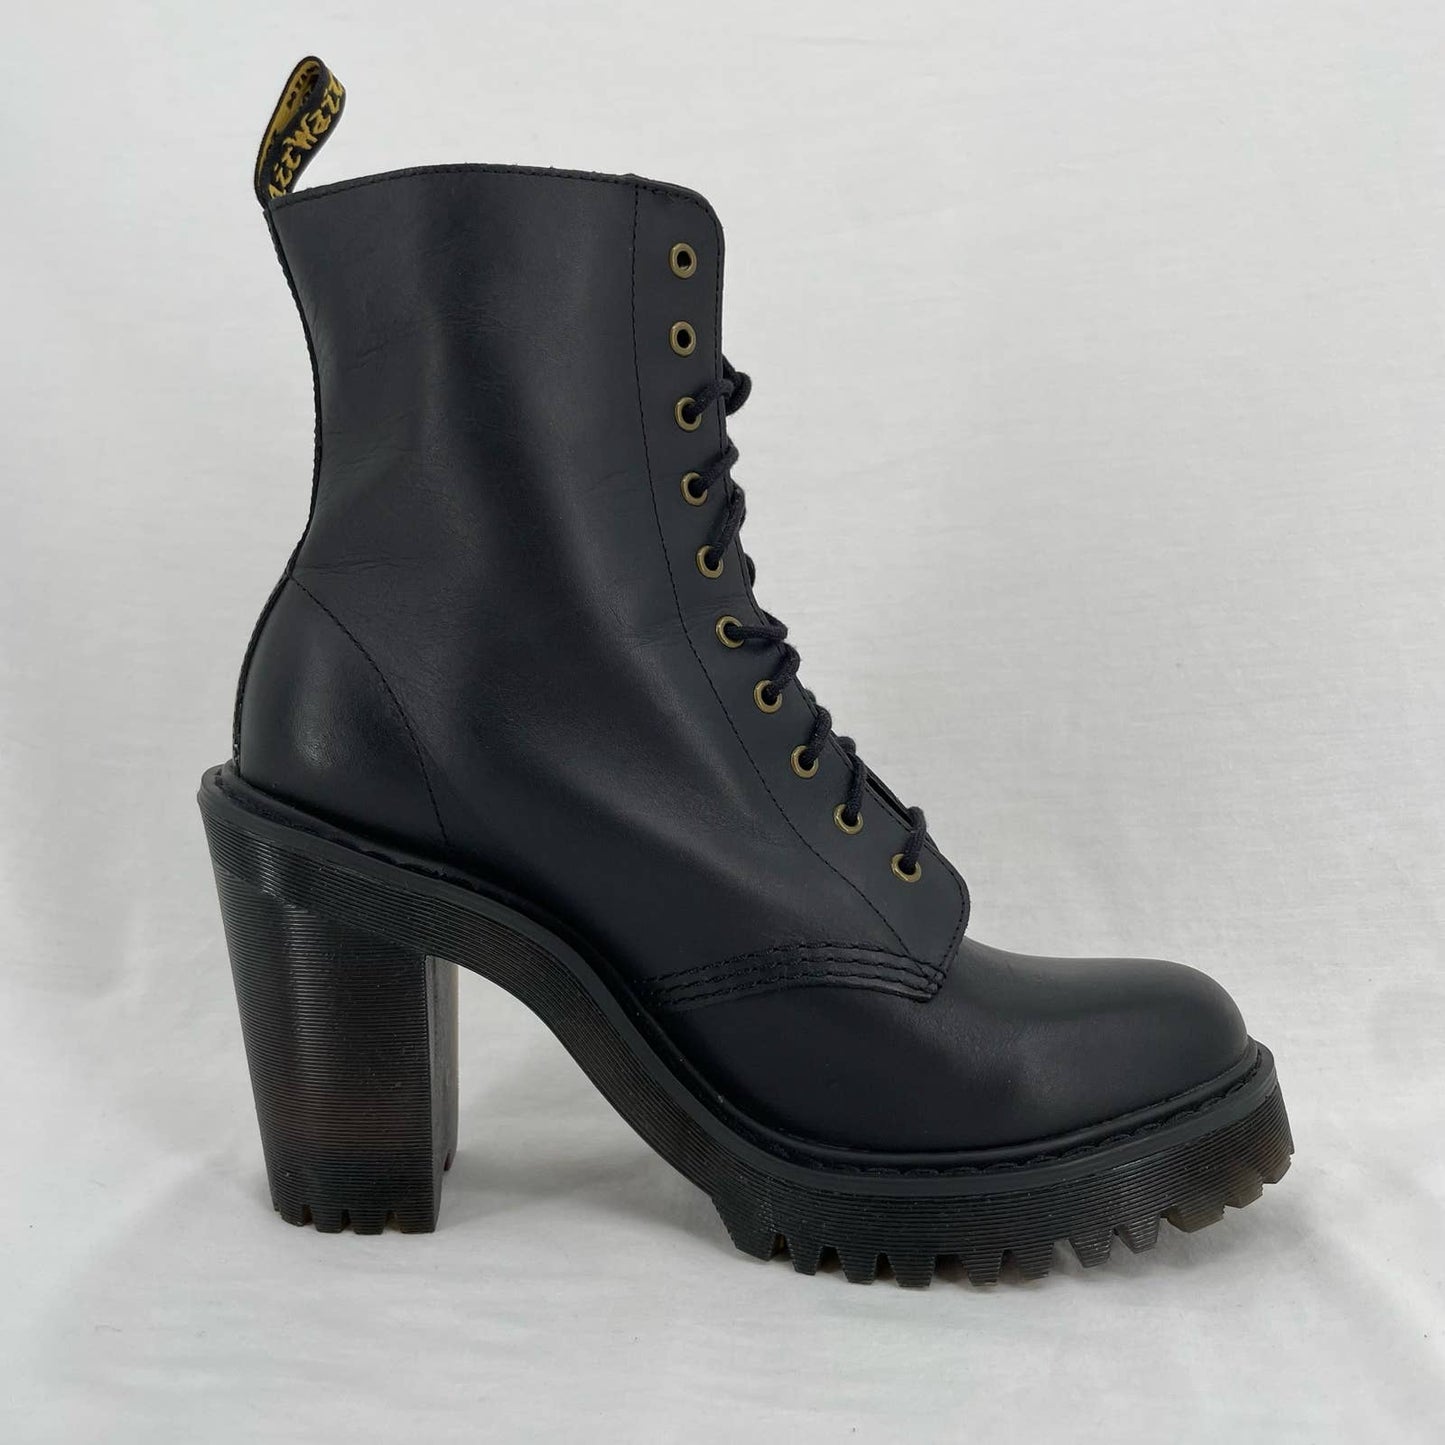 Dr. Martens Kendra Black High Heels Smooth Leather Lace Up Witchy Heeled Boots Size 9